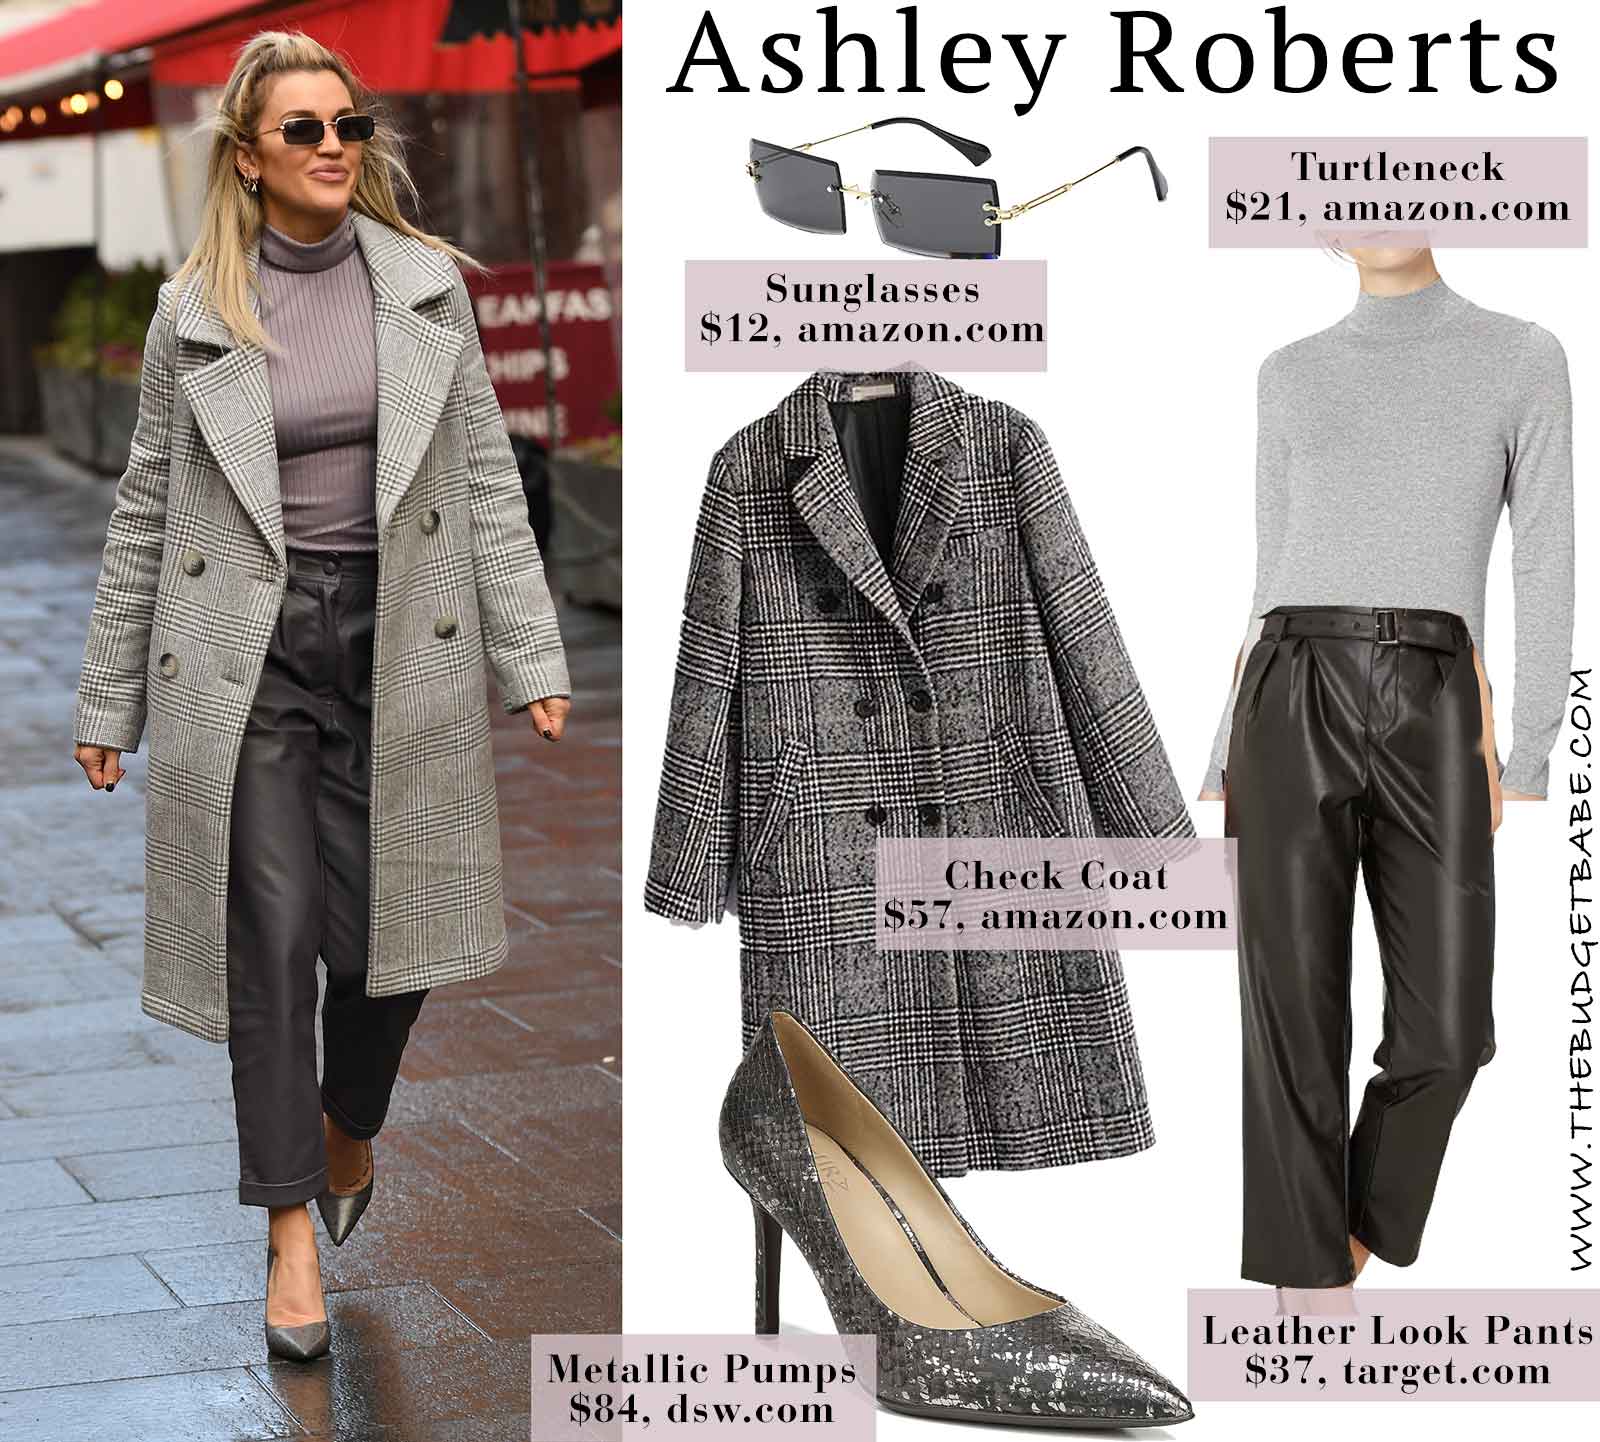 Ashley Roberts gray check coat, leather pants and gray turtleneck look for less